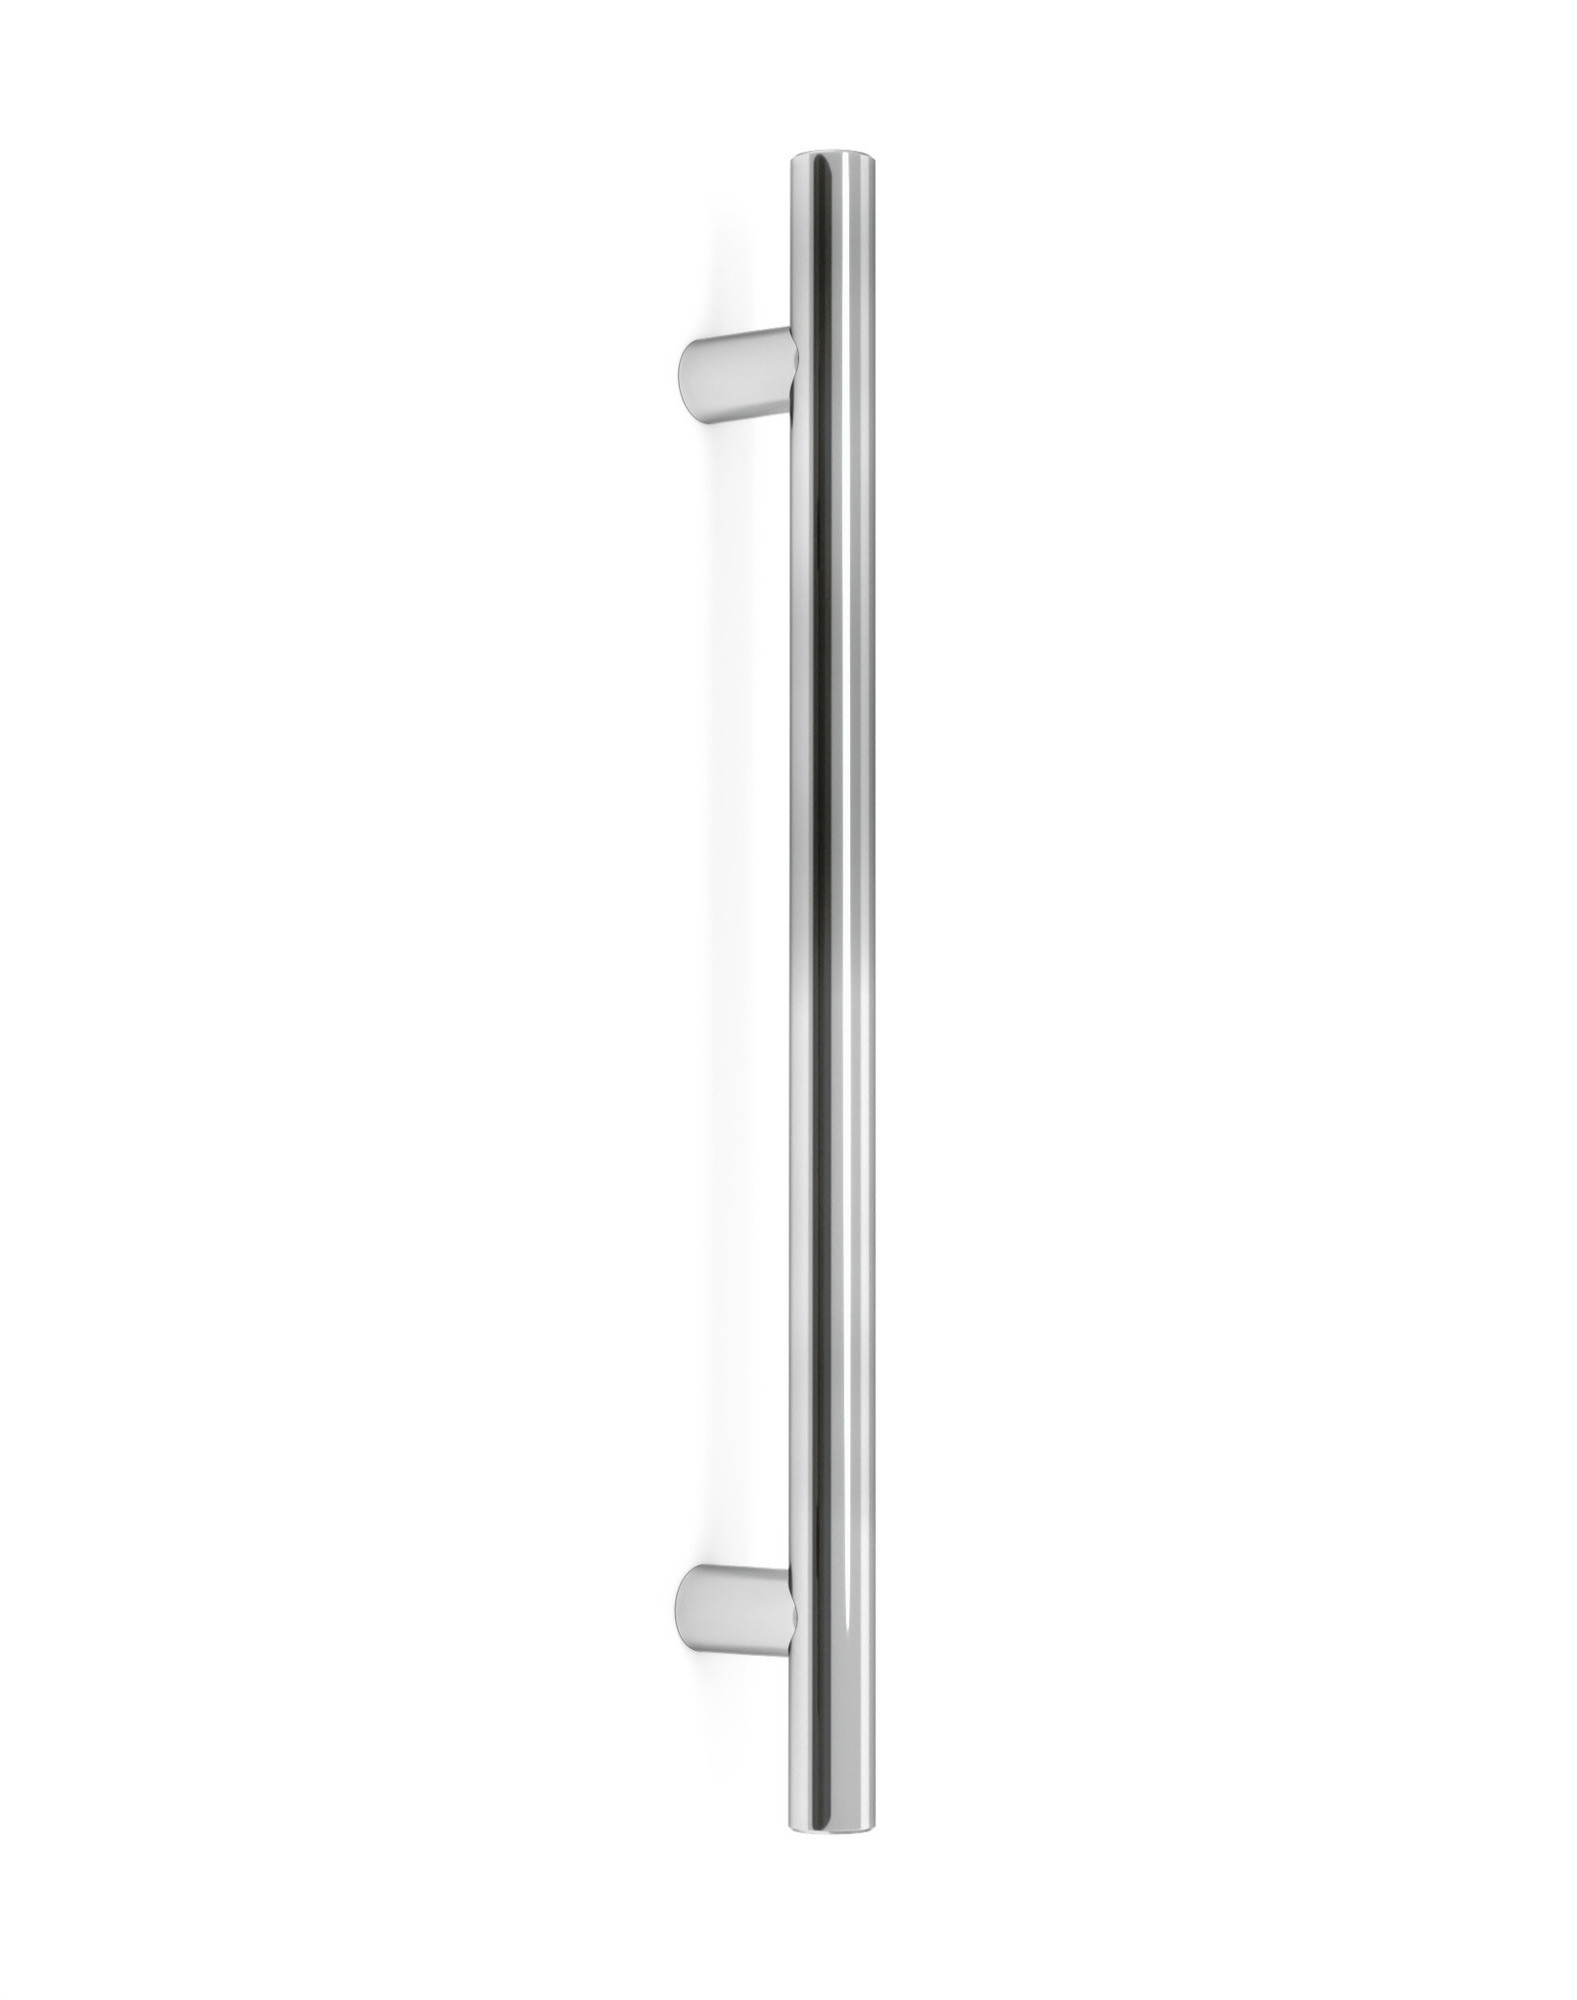 Refrigerator and Appliance: Ladder Pull Handle, Polished US32/629 Finish, 304 Grade Stainless Steel Alloy